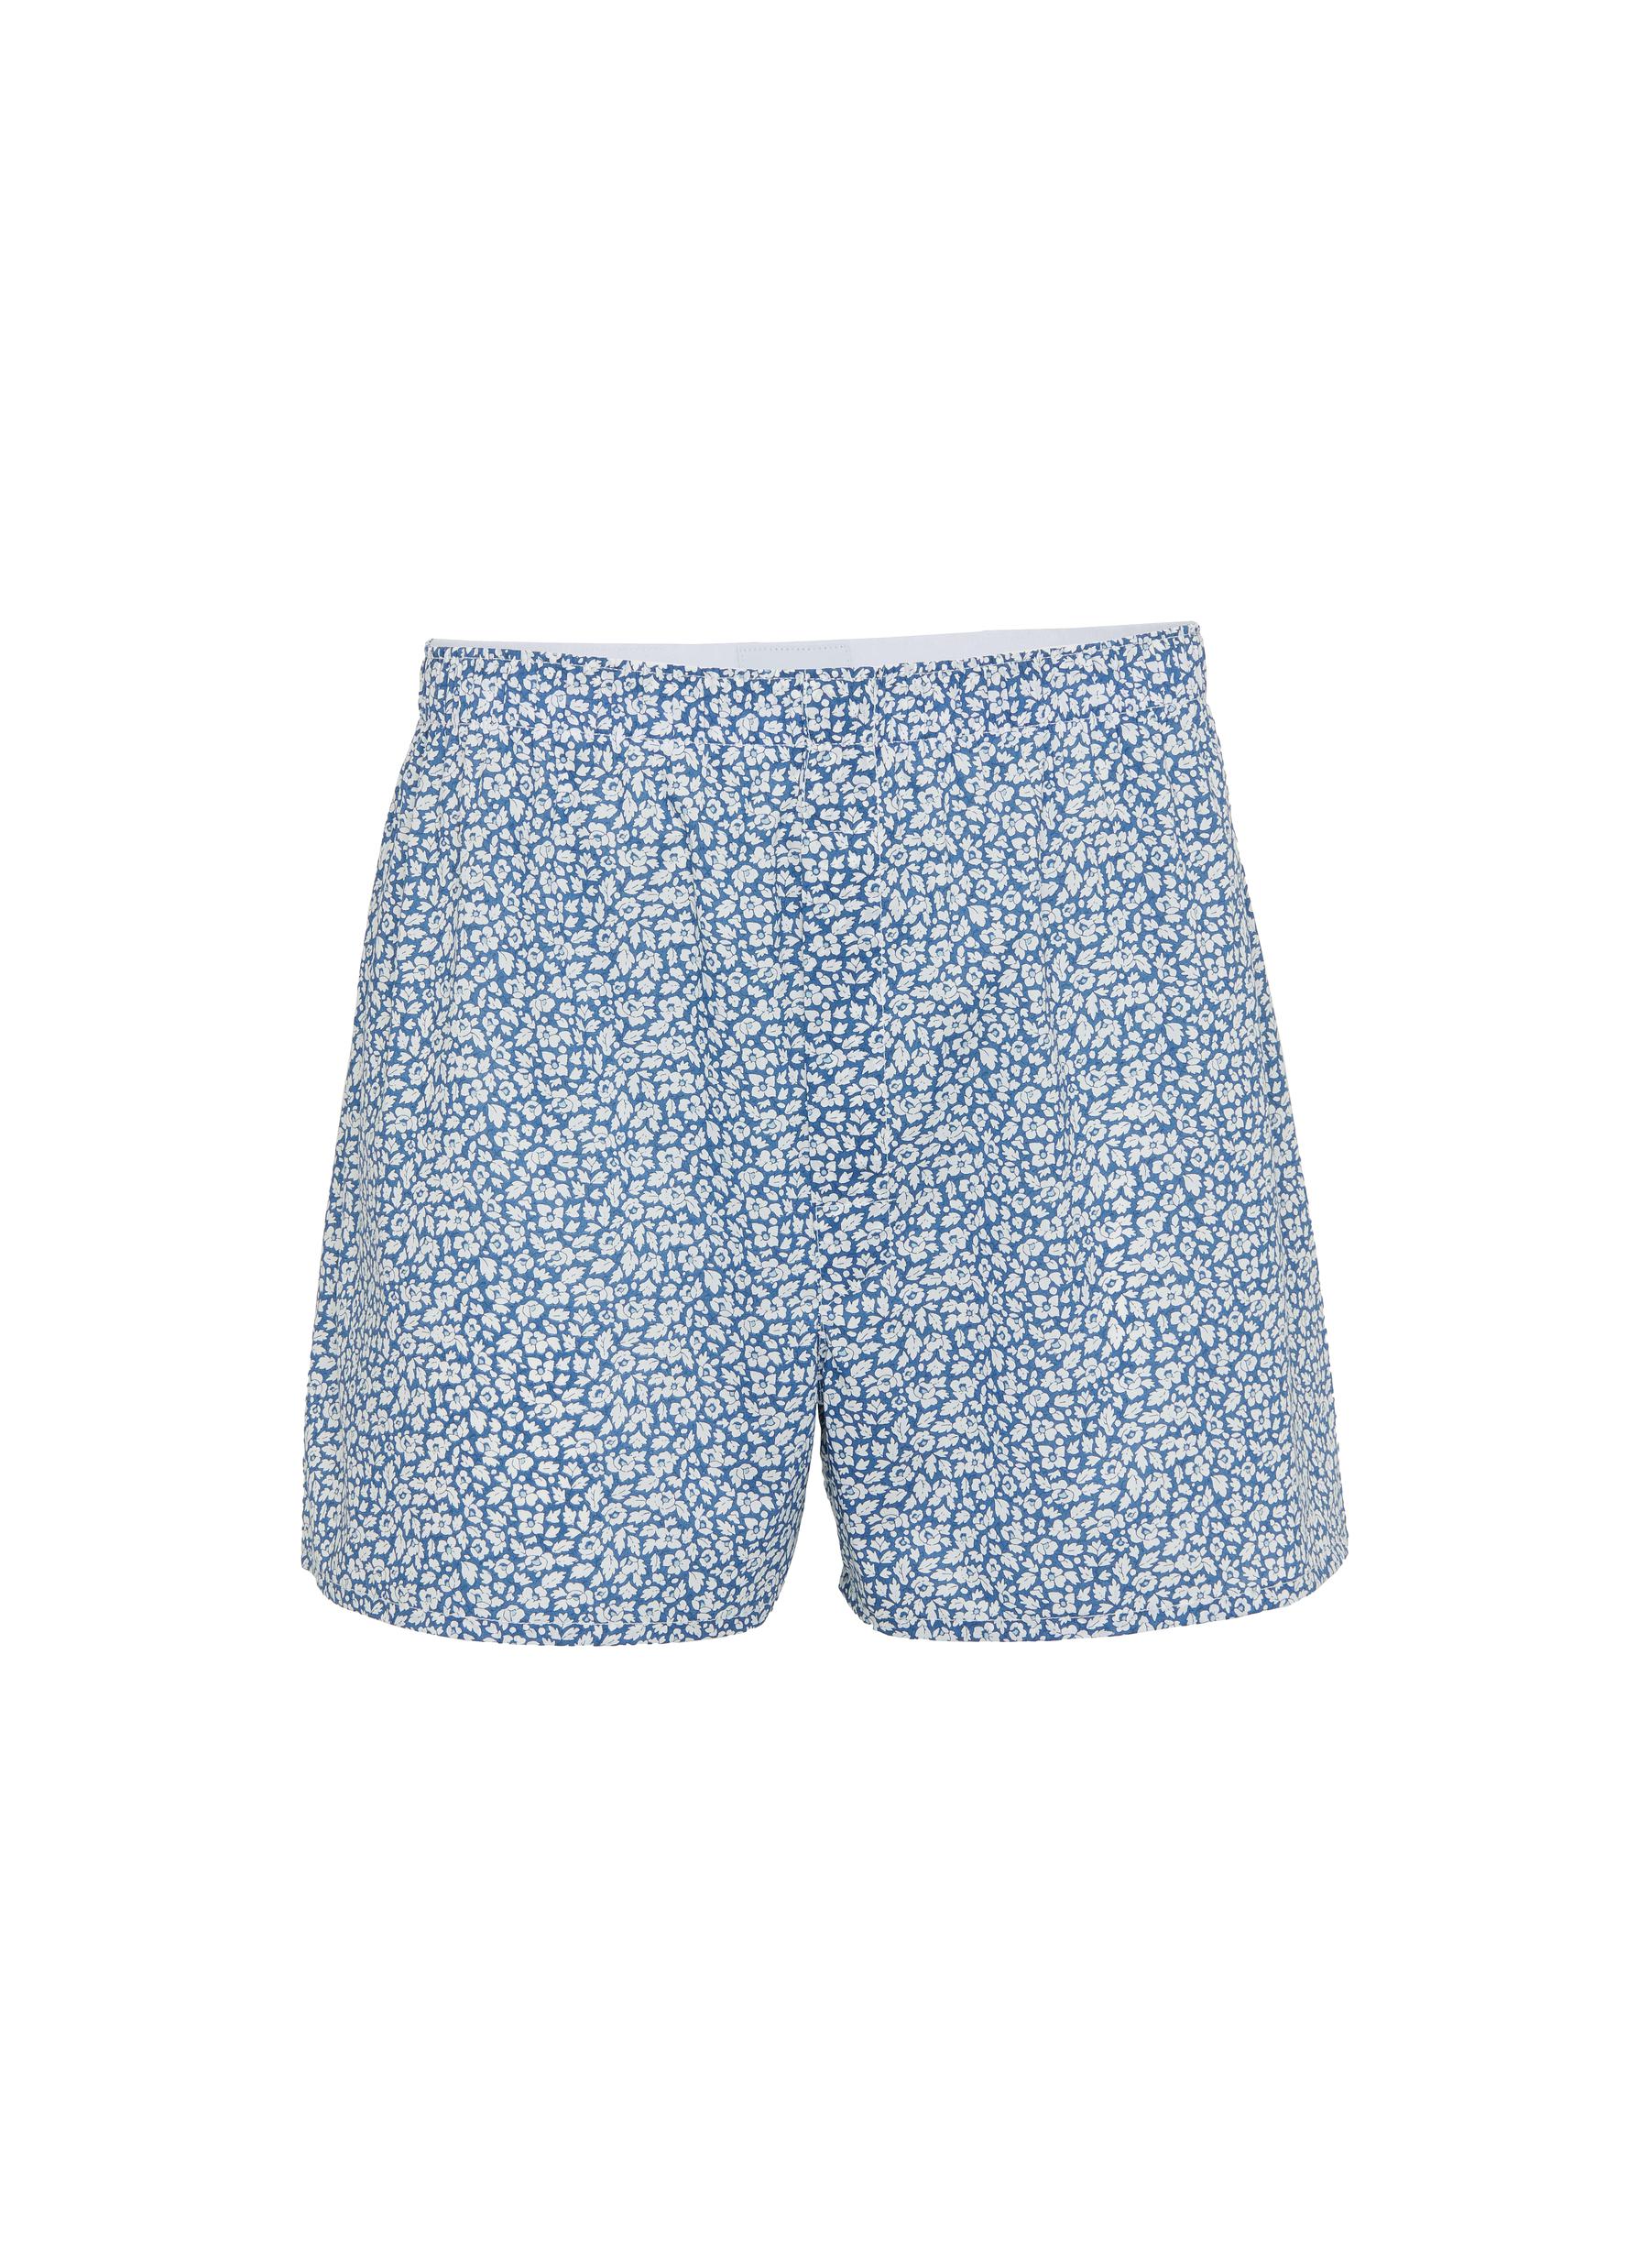 x Liberty Feather Meadow Print Boxer Shorts